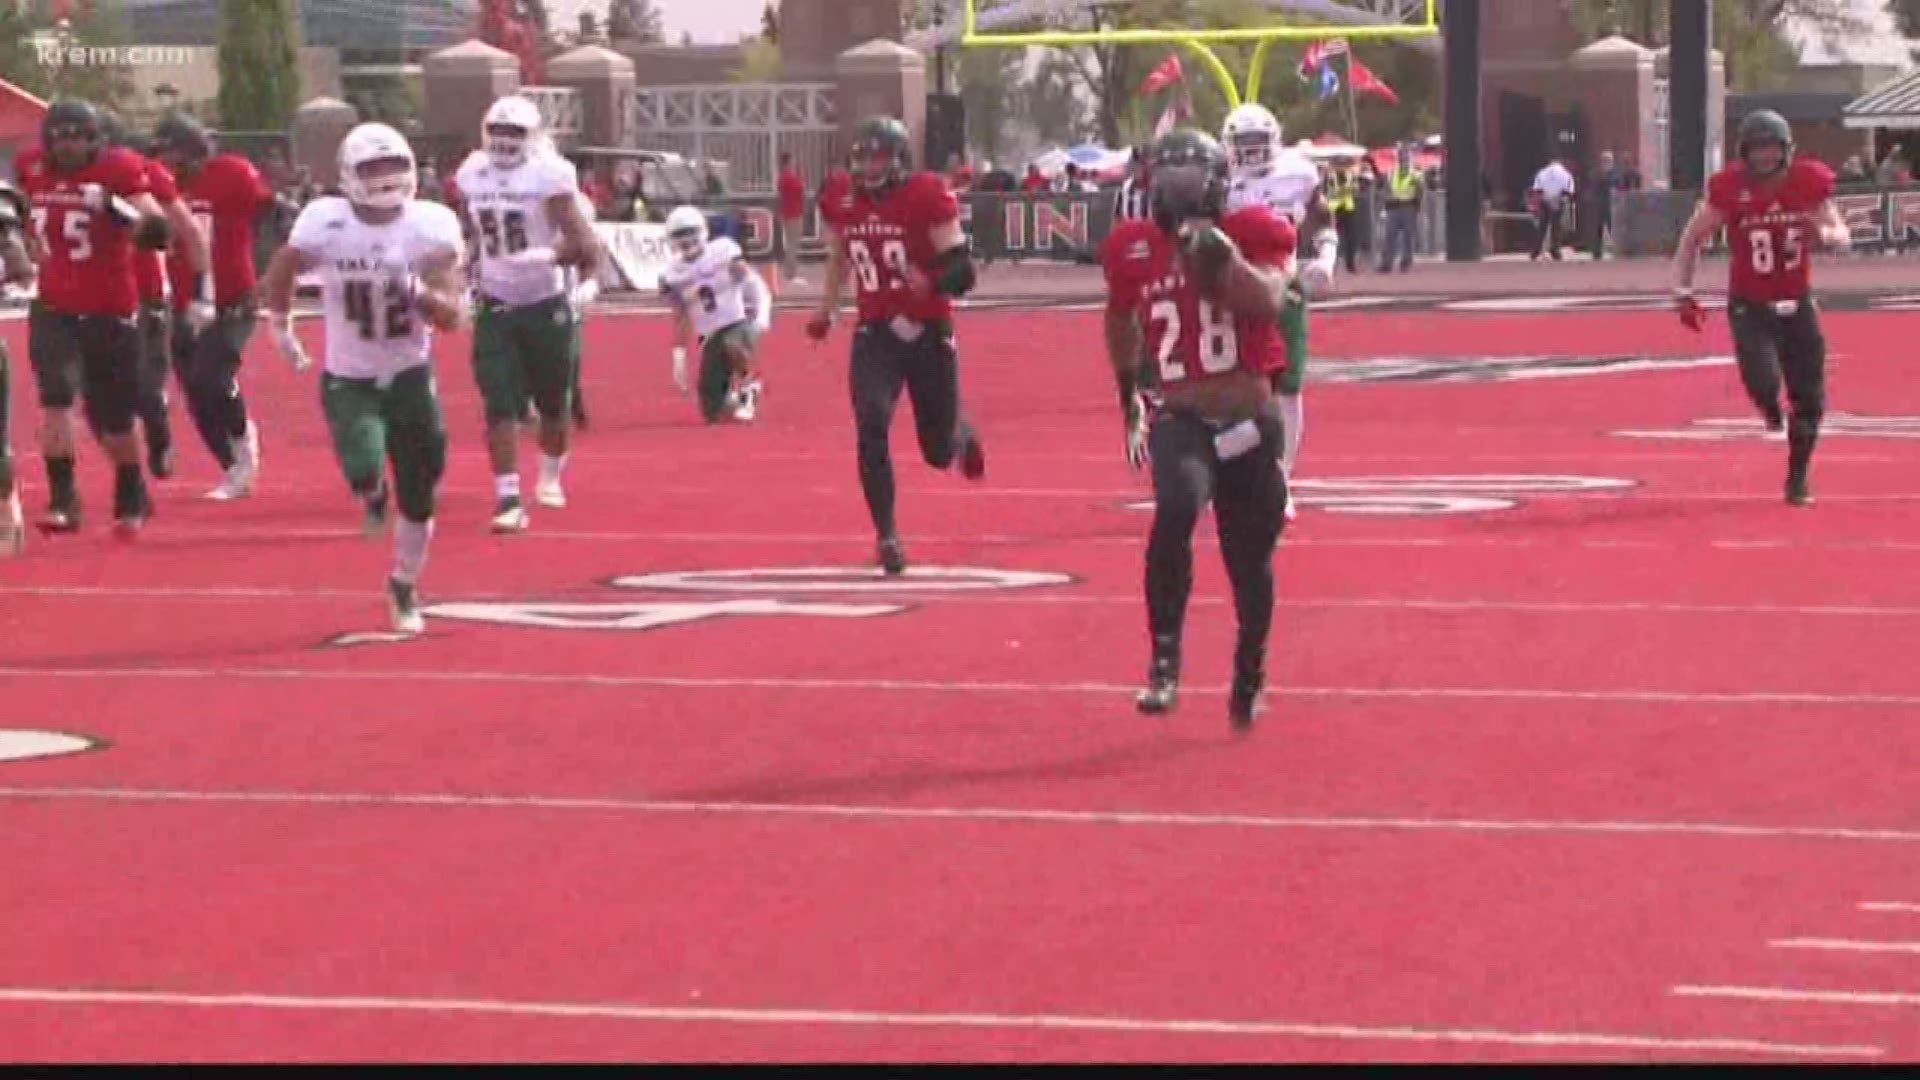 EWU's offense totaled over 650 yards.